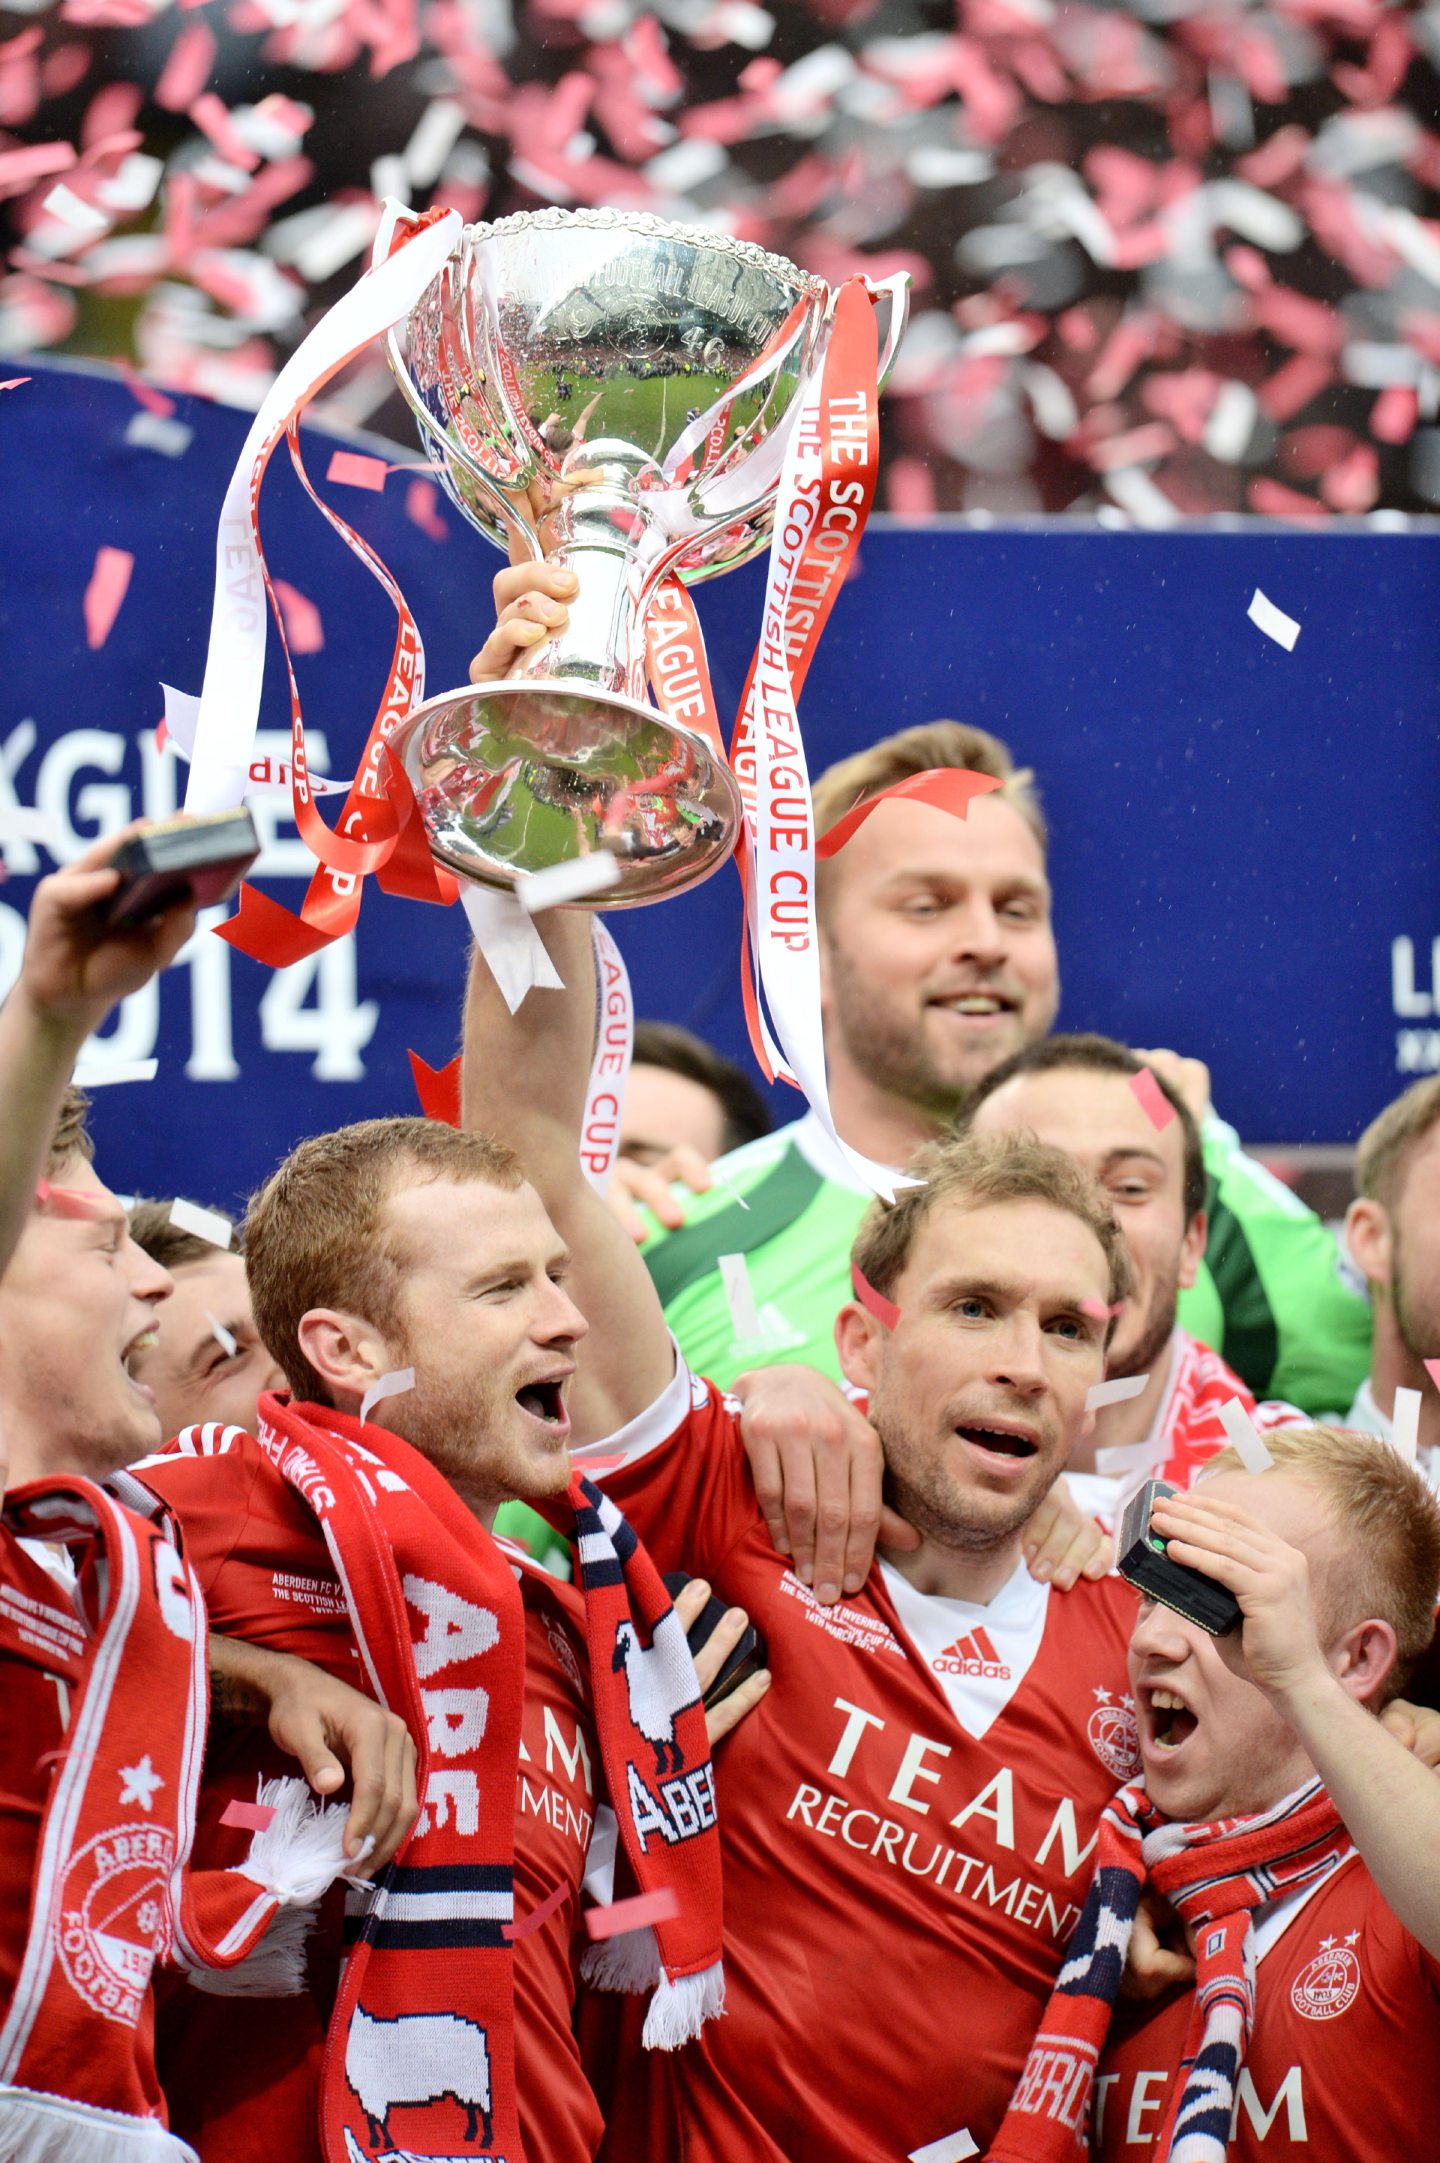 Aberdeen's Russell Anderson with silver Scottish League Cup Trophy in hand in 2014.